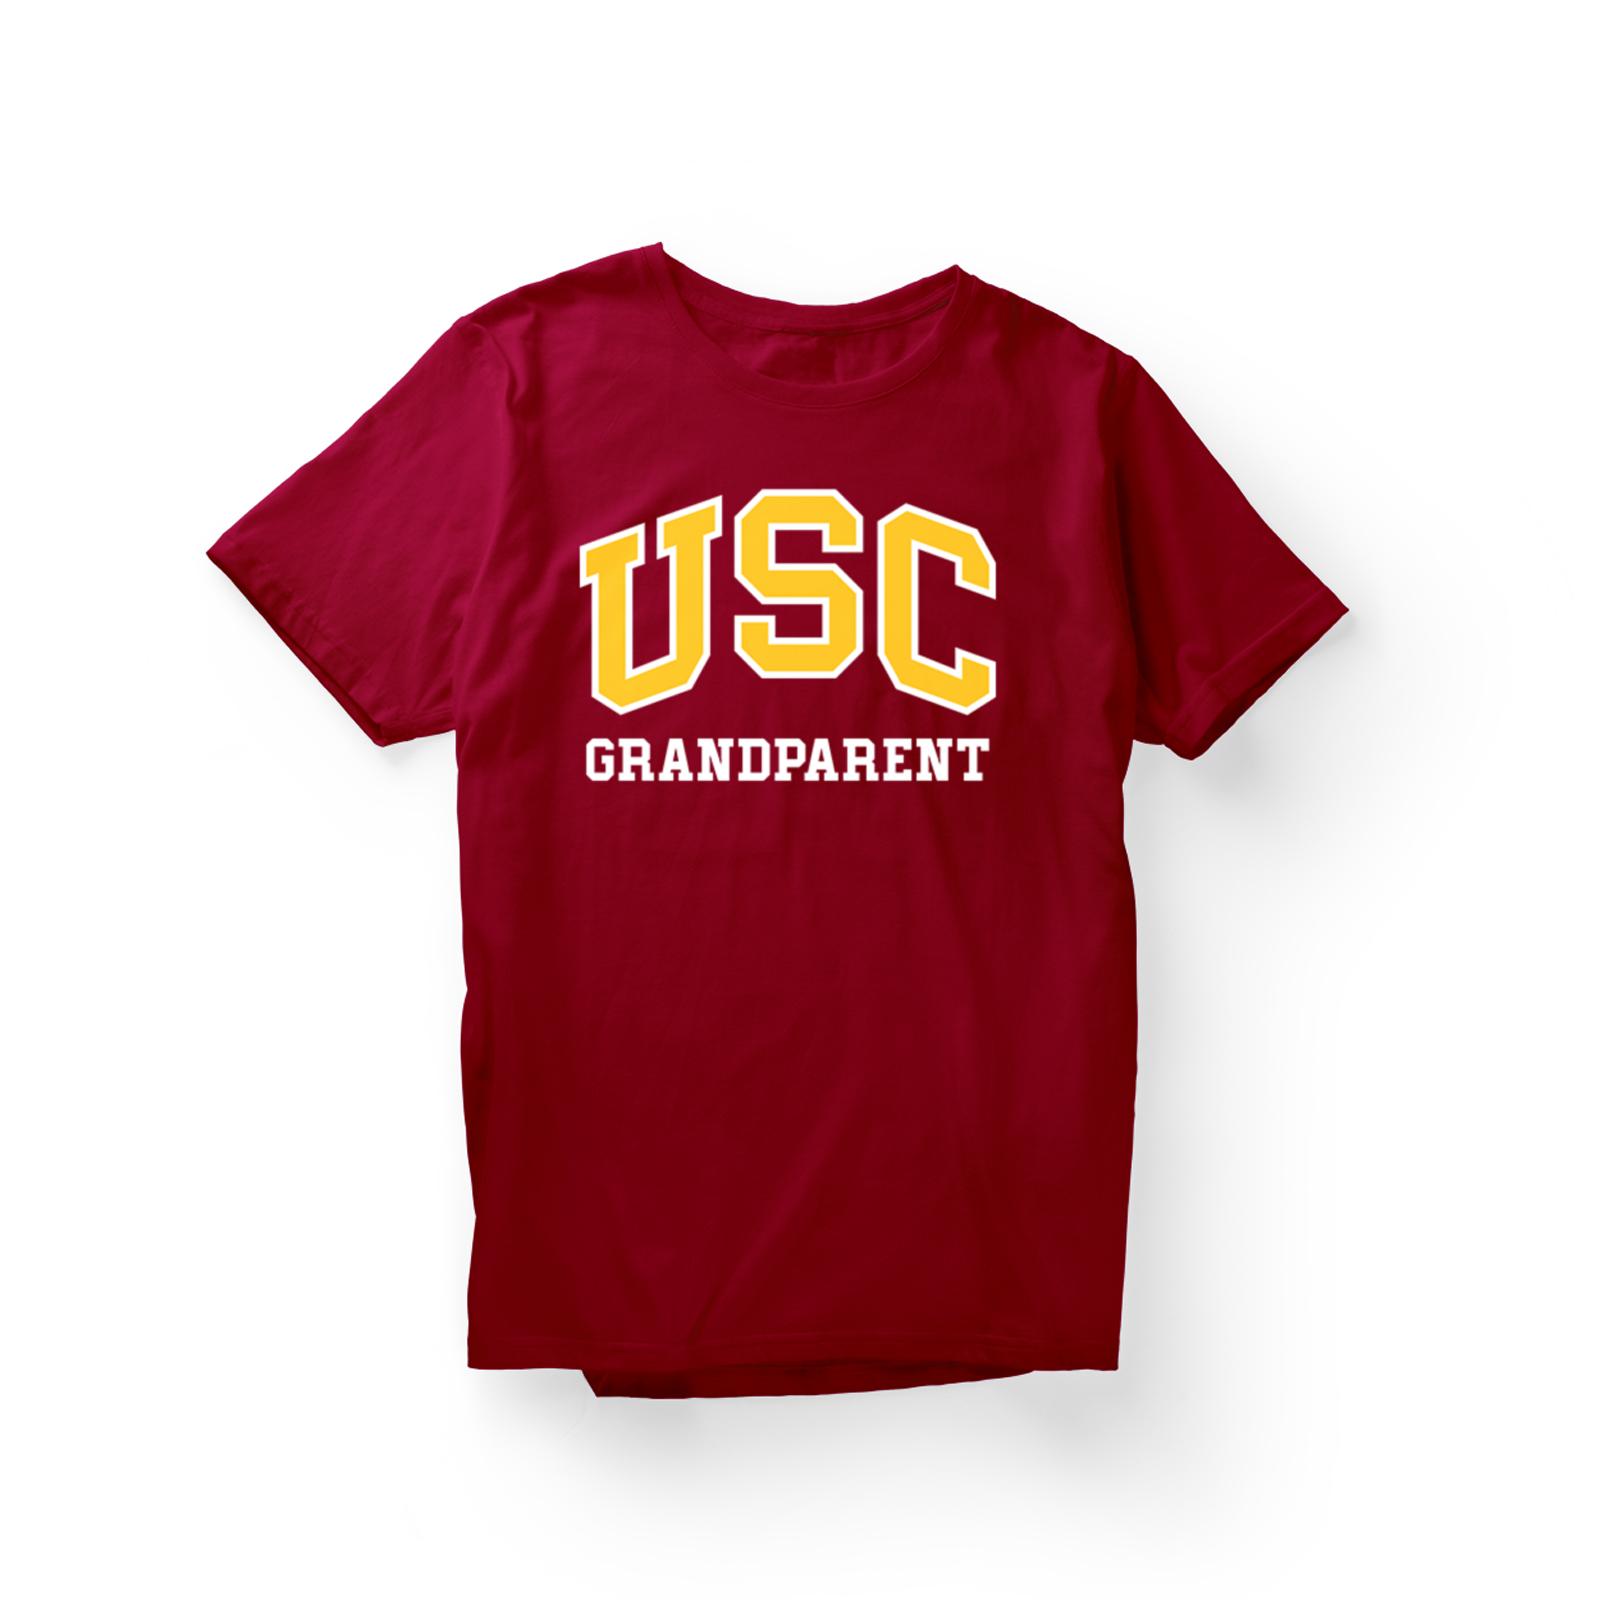 USC Arch with Stroke over Grandparent SS Tee Cardinal image01